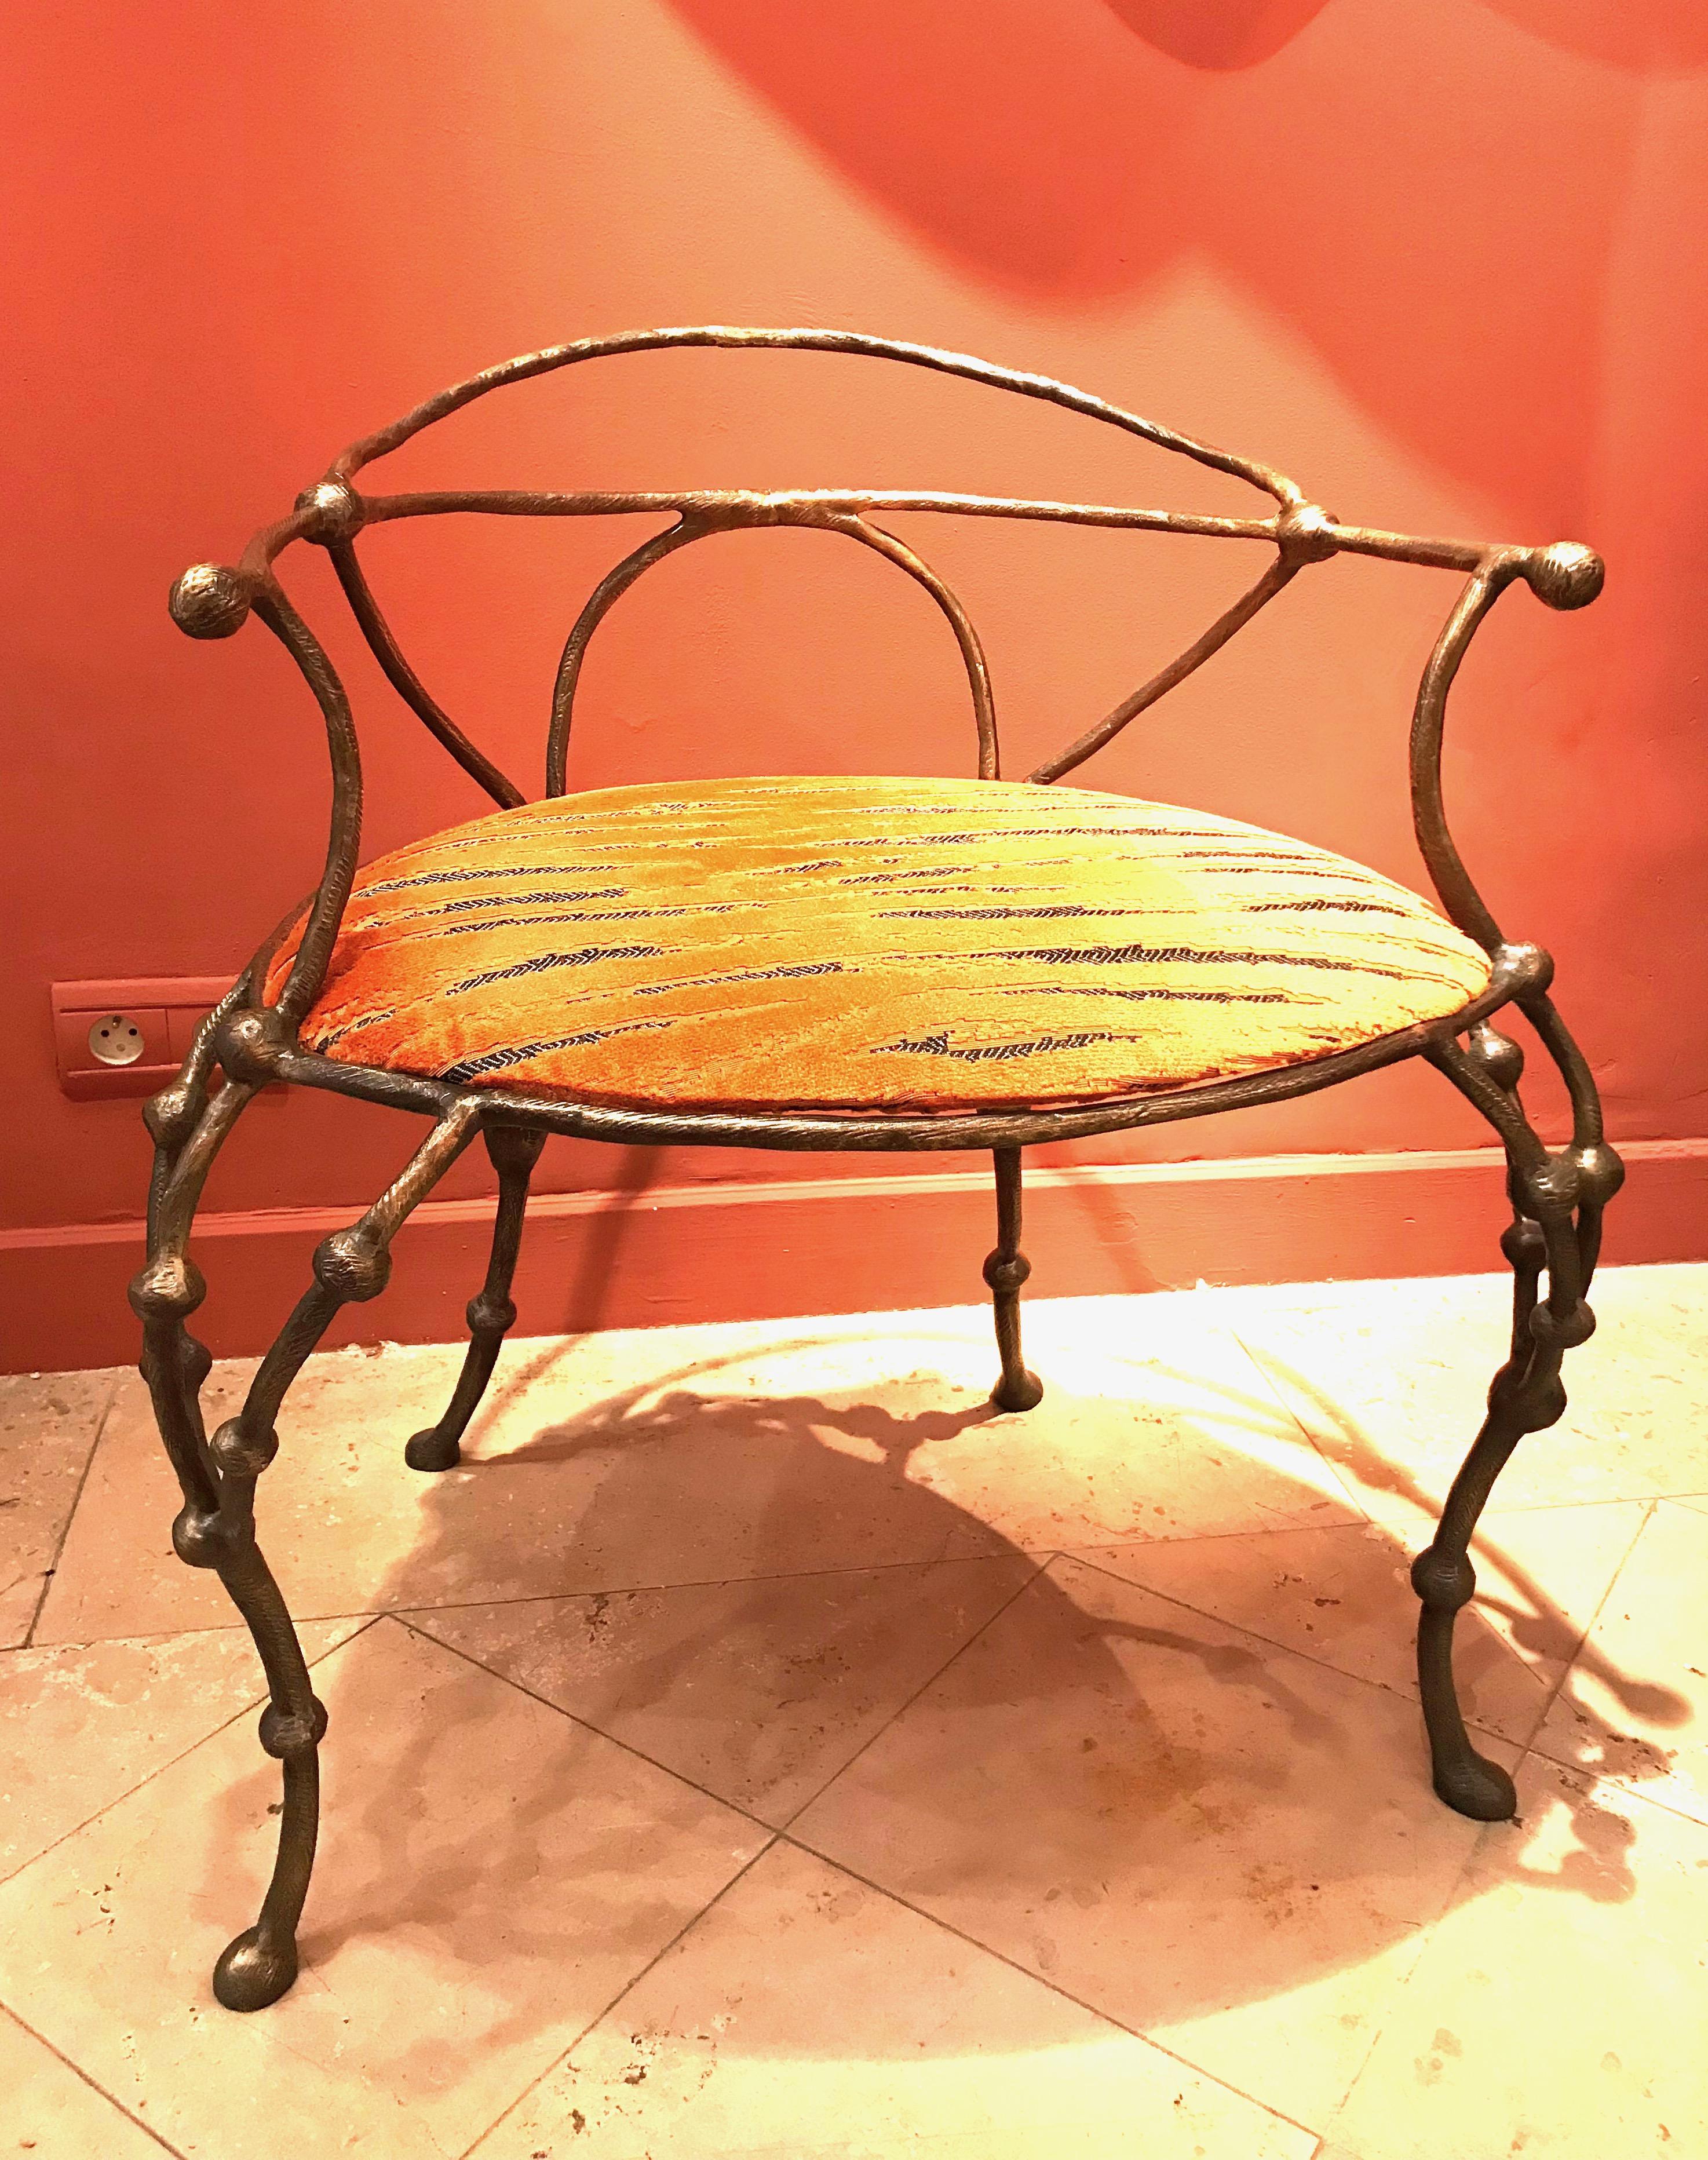 Franck Evennou 2009, pair of bronze armchairs, 2 from a edition of 8.
Measures: 75 cm H, 56 cm L, 45 cm P
Dated and Signed

Franck Evennou uses bronze like a poet uses words. He uses the language of matter to re-invent a poetic form inspired by